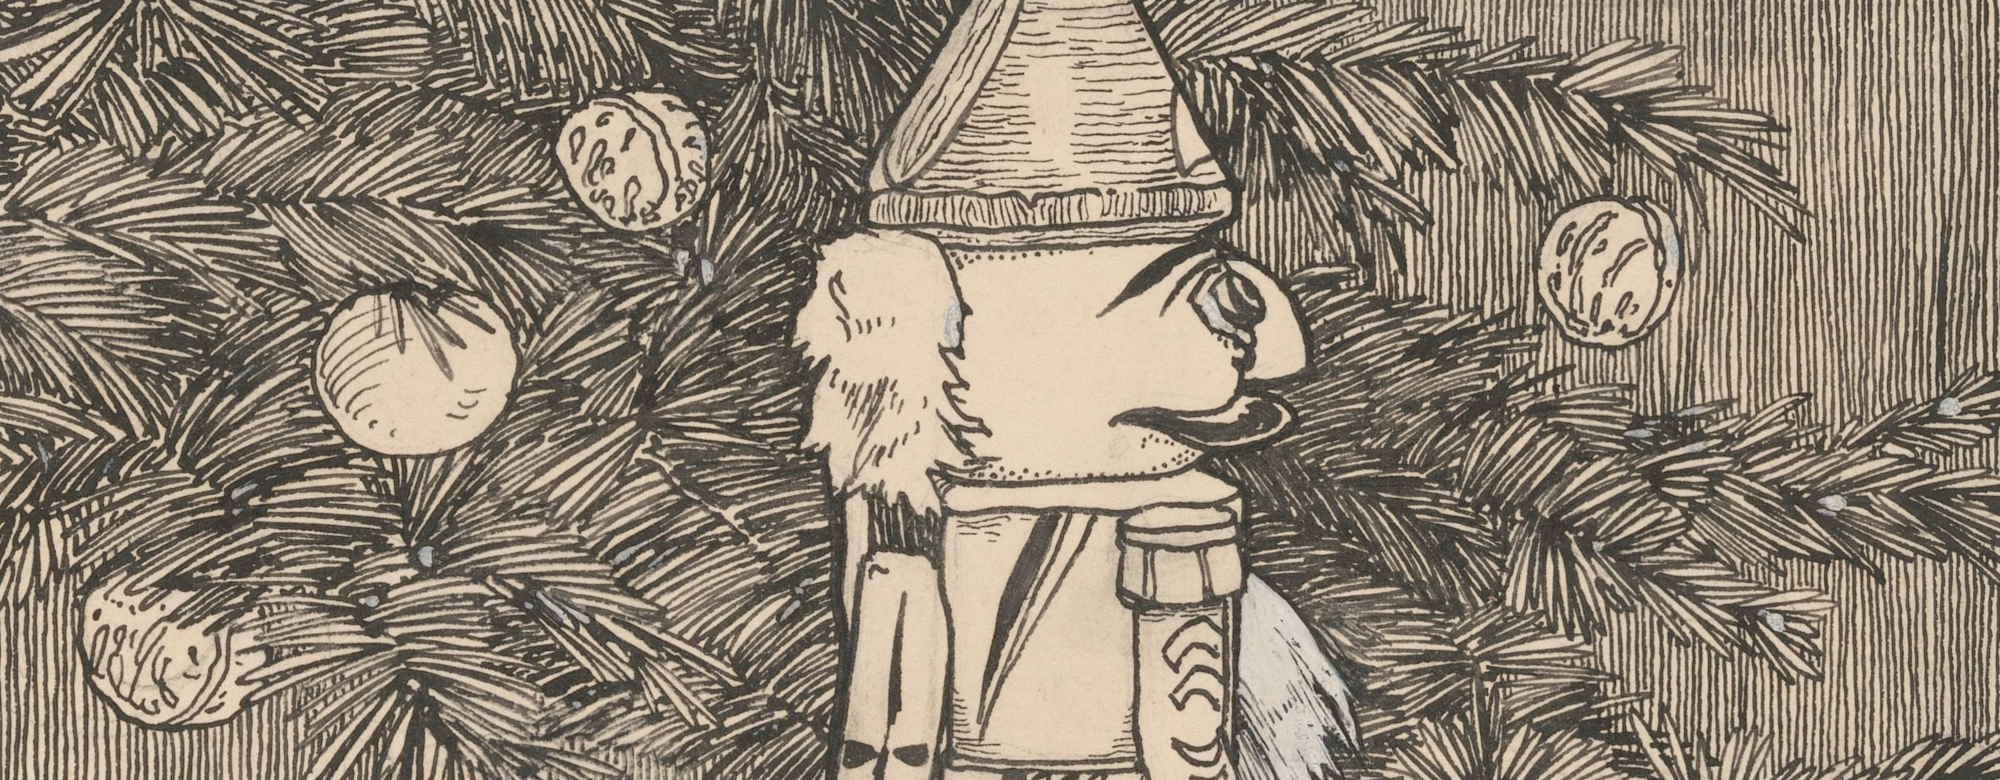 Drawing of Nutcracker in a hussar's cloak near a Christmas tree by Willem Wenckebach (cropped).